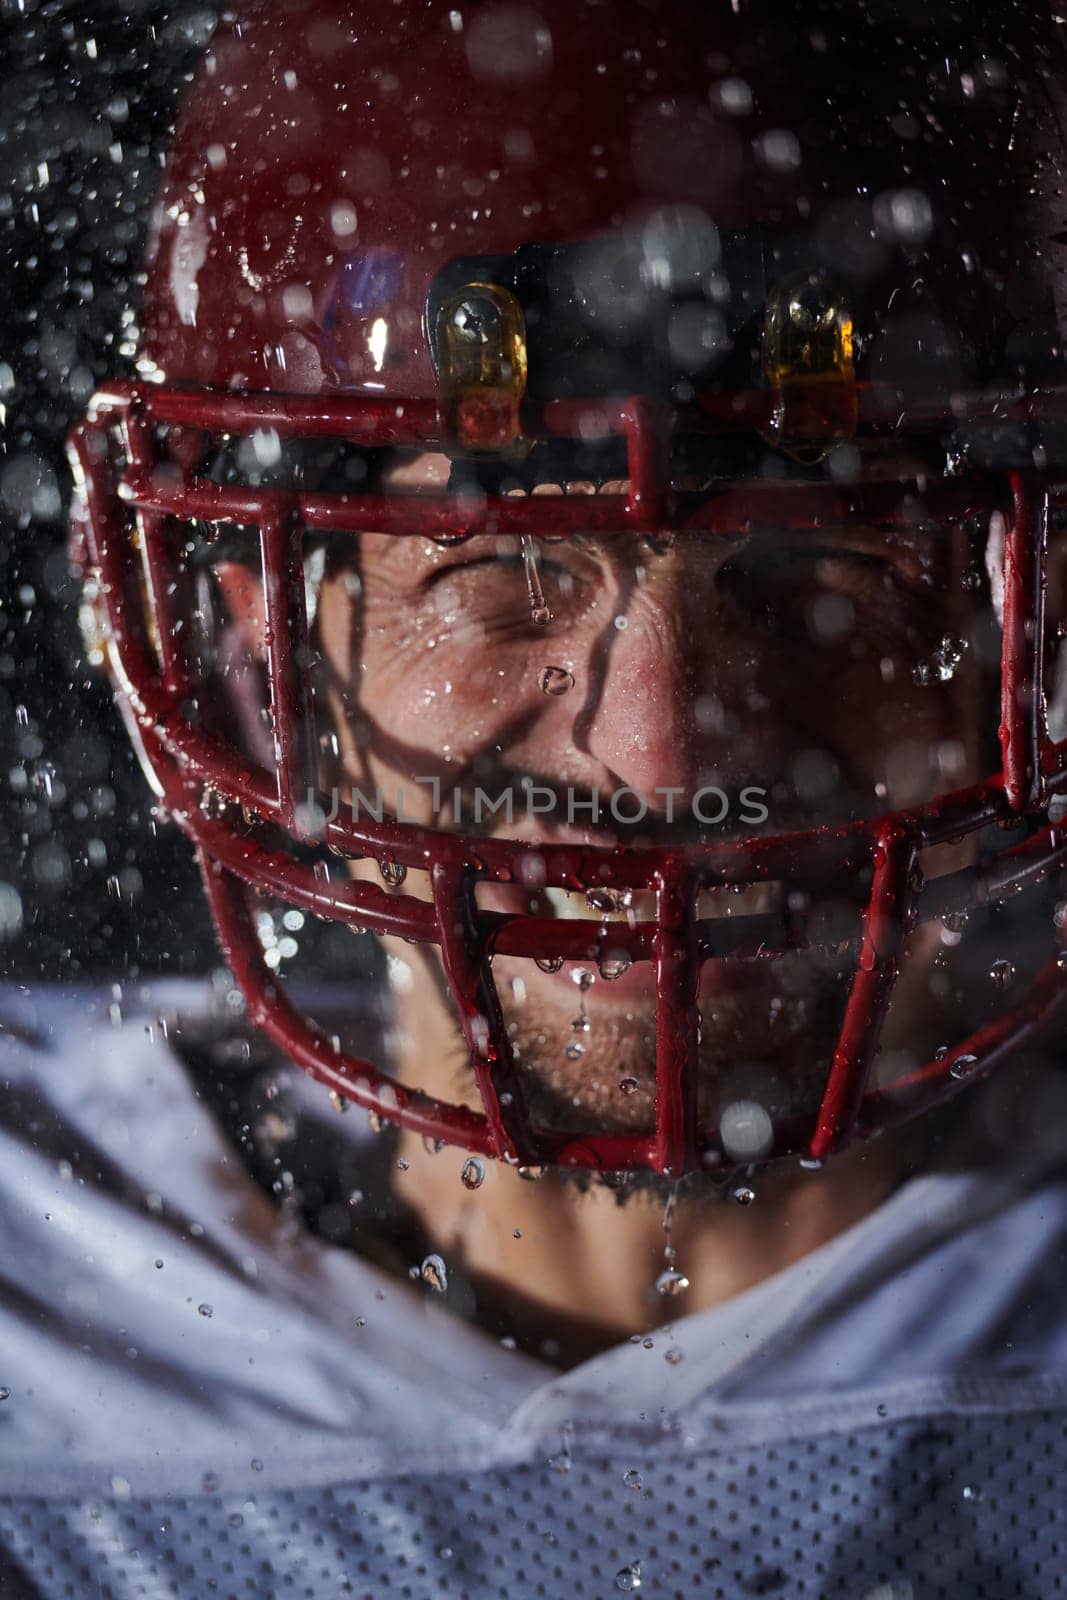 American Football Field: Lonely Athlete Warrior Standing on a Field Holds his Helmet and Ready to Play. Player Preparing to Run, Attack and Score Touchdown. Rainy Night with Dramatic Fog, Blue Light.